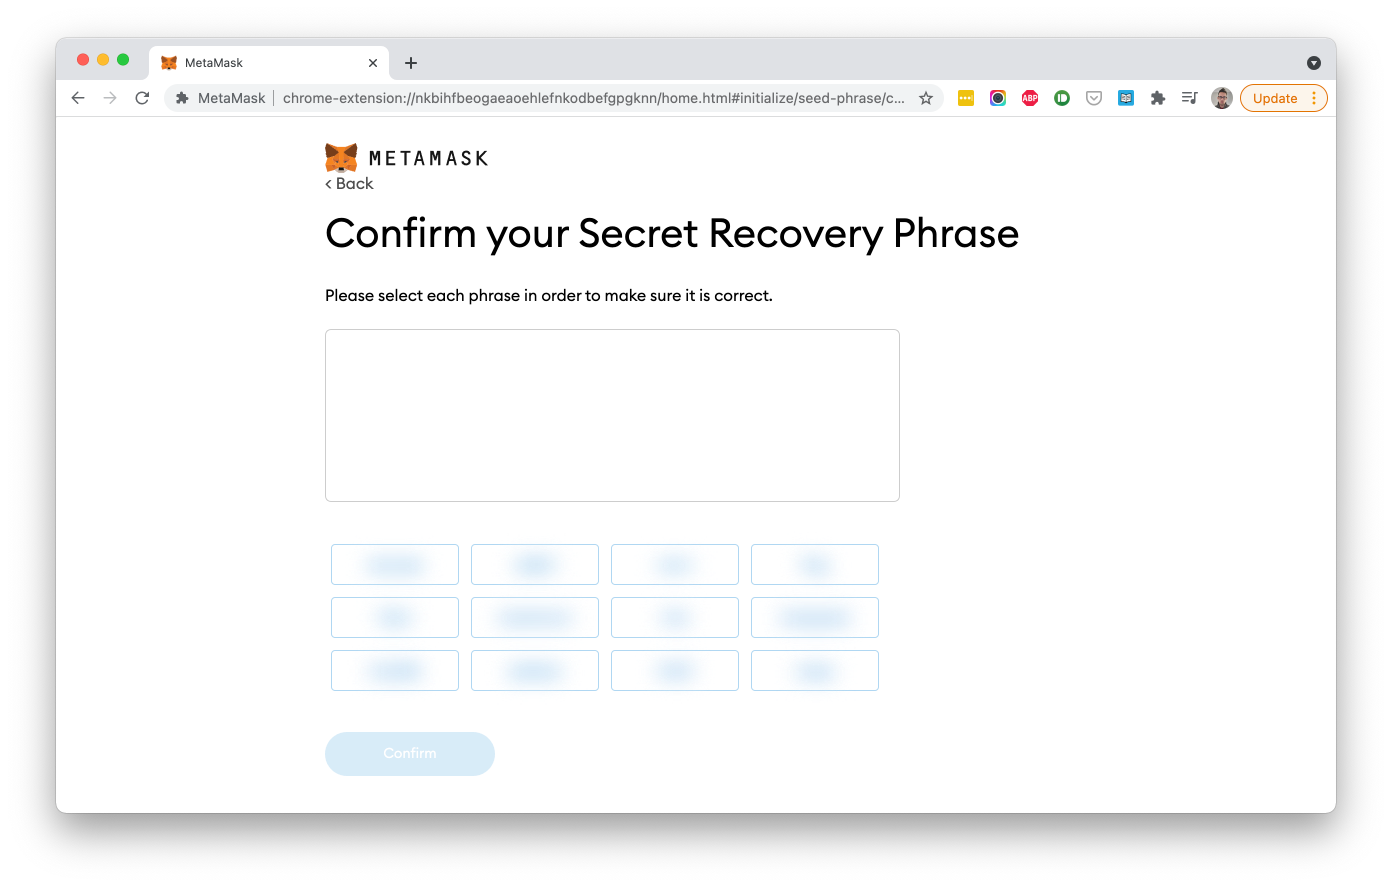 MetaMask - Confirm Secret Recovery Phrase